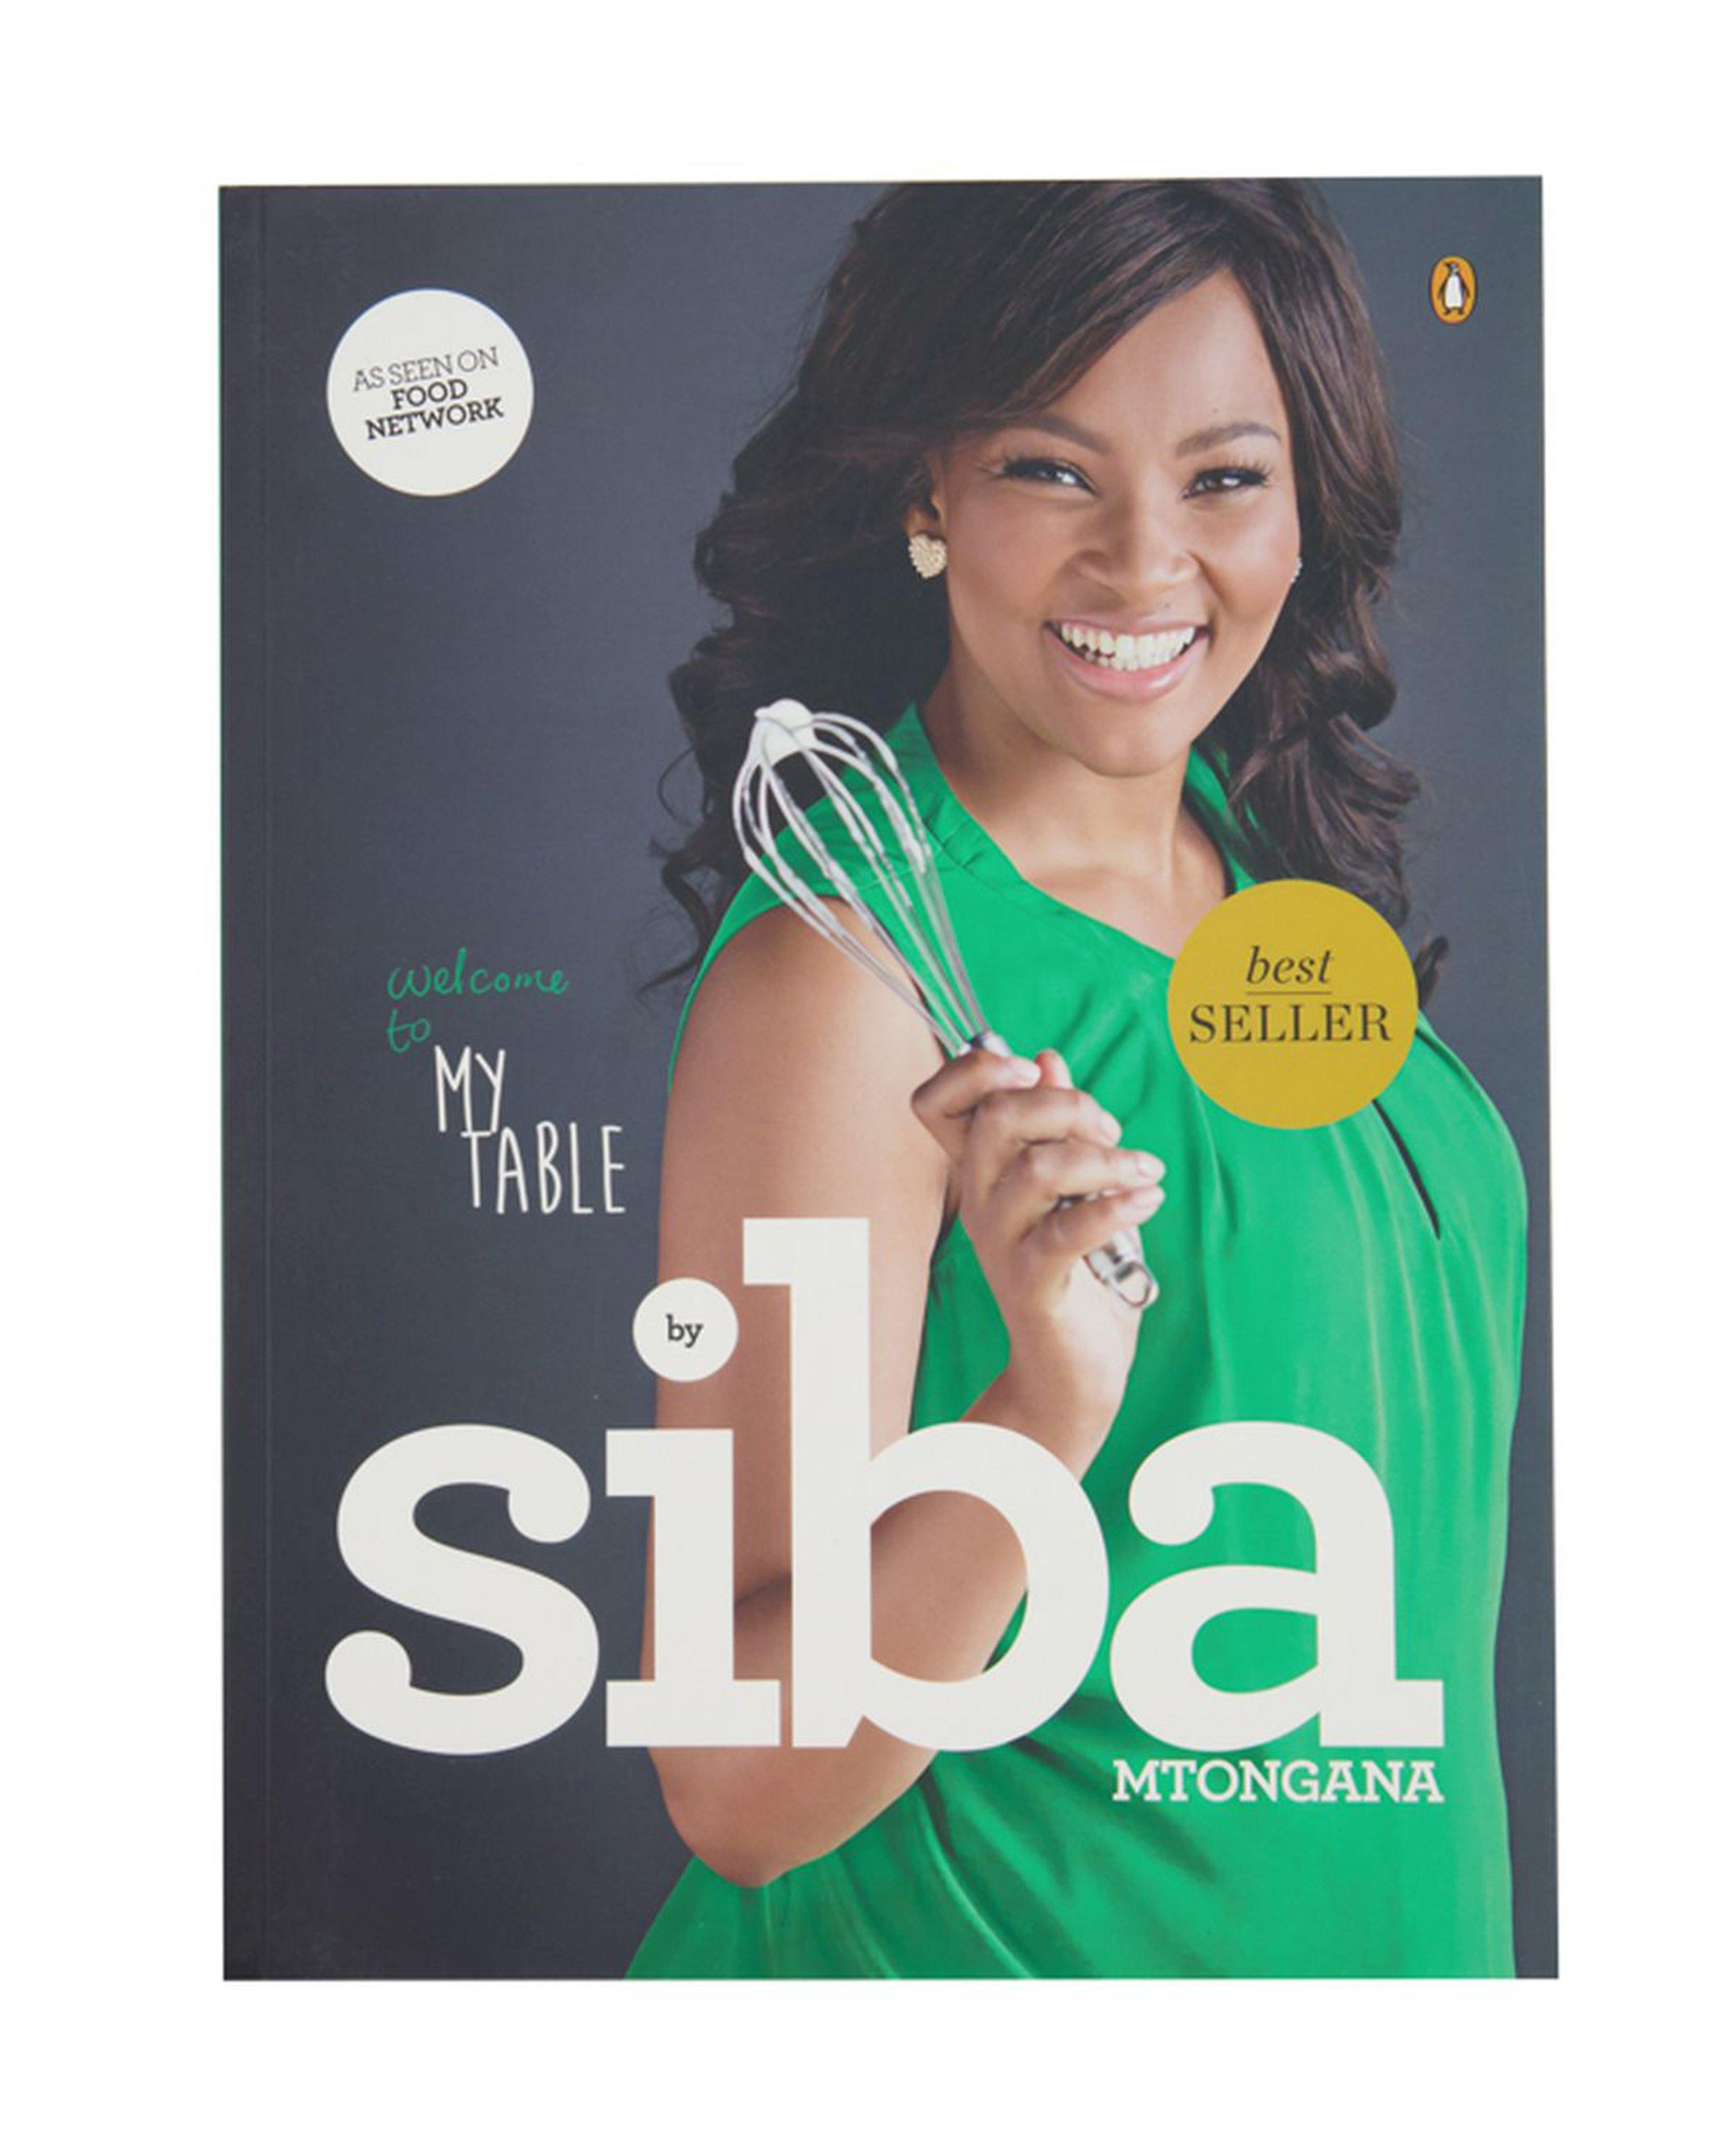 Welcome To My Table by Siba Mtongana -  Assorted